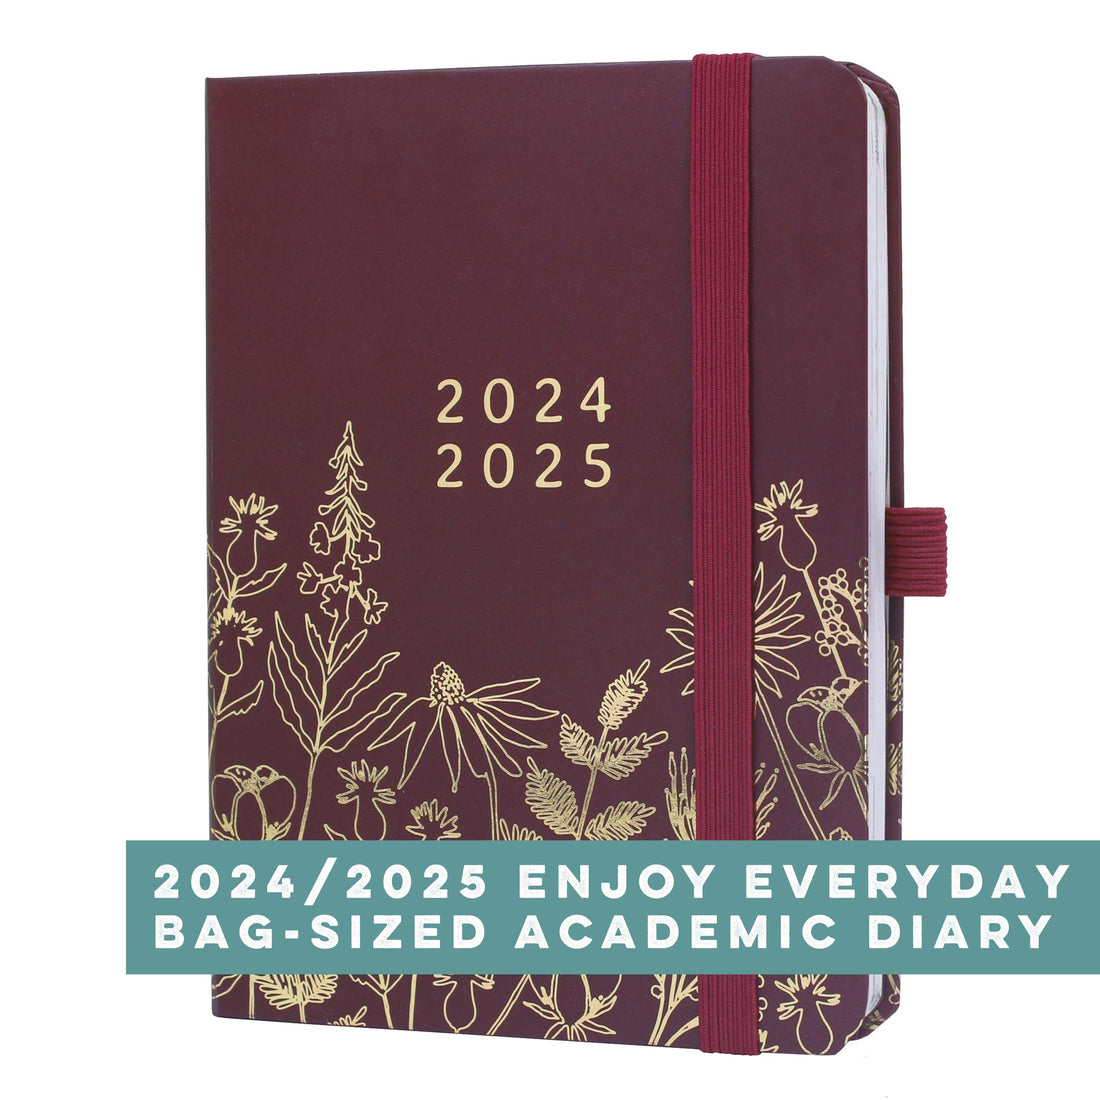 Boxclever Press Everyday Academic Diary 2024 2025 in a purple and gold floral design